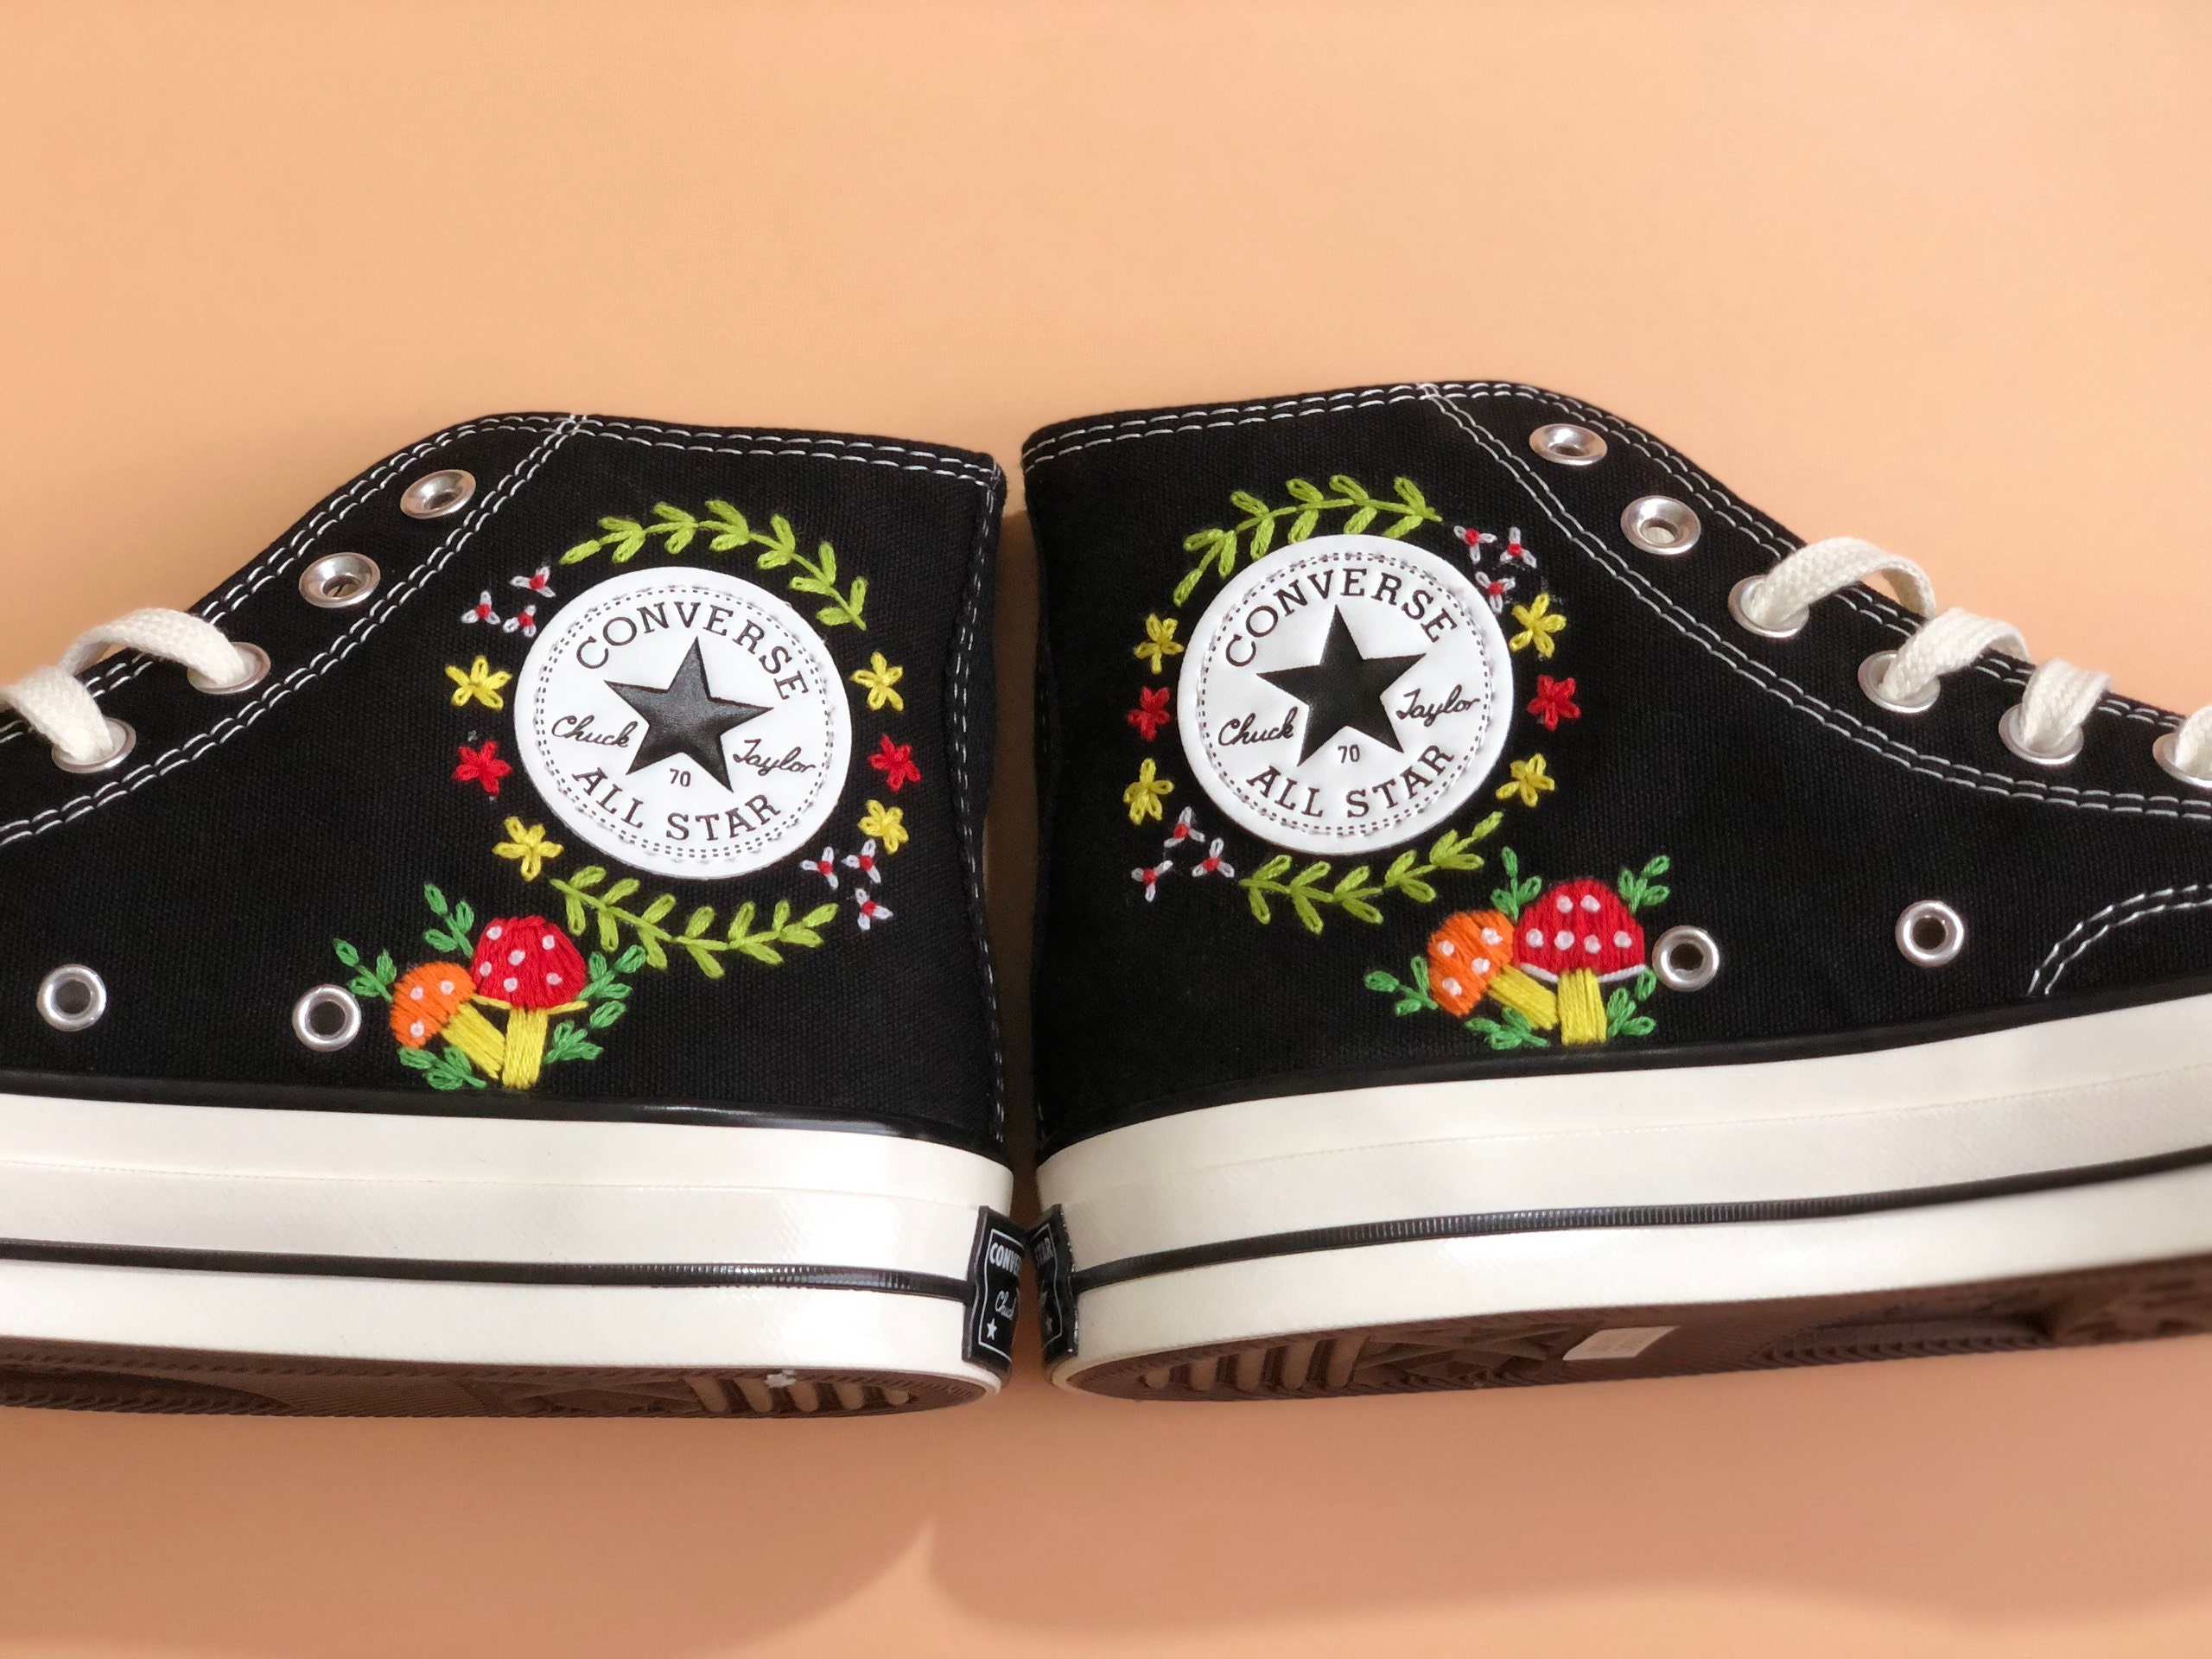 Converse X Dior Shoes Embroidery – embroiderystores